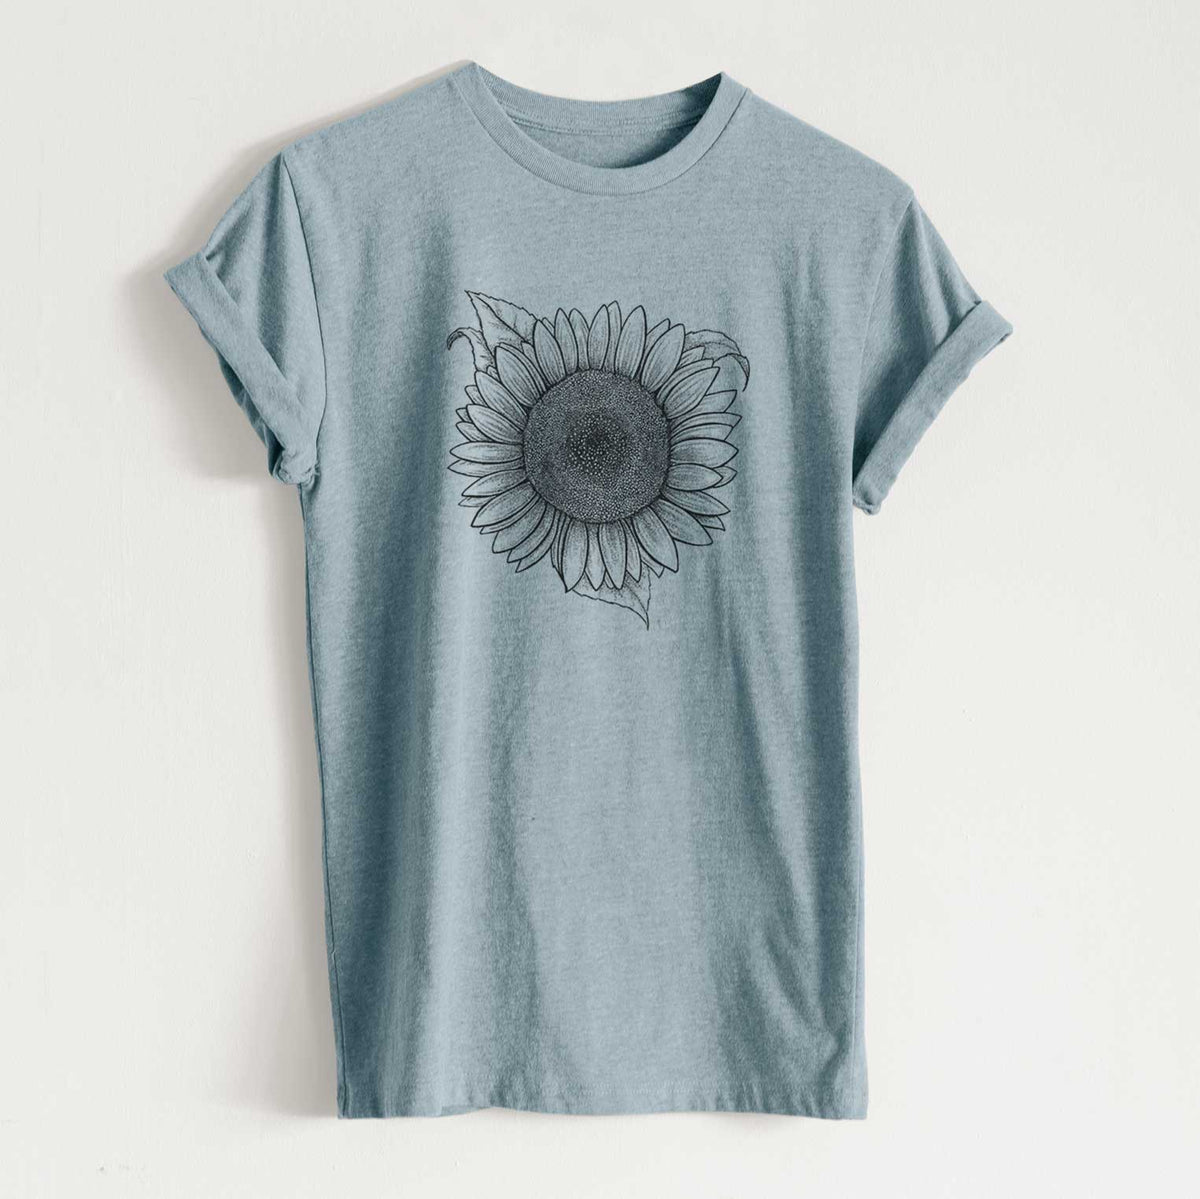 Lemon Queen Sunflower - Helianthus Annuus - Unisex Recycled Eco Tee  - CLOSEOUT - FINAL SALE